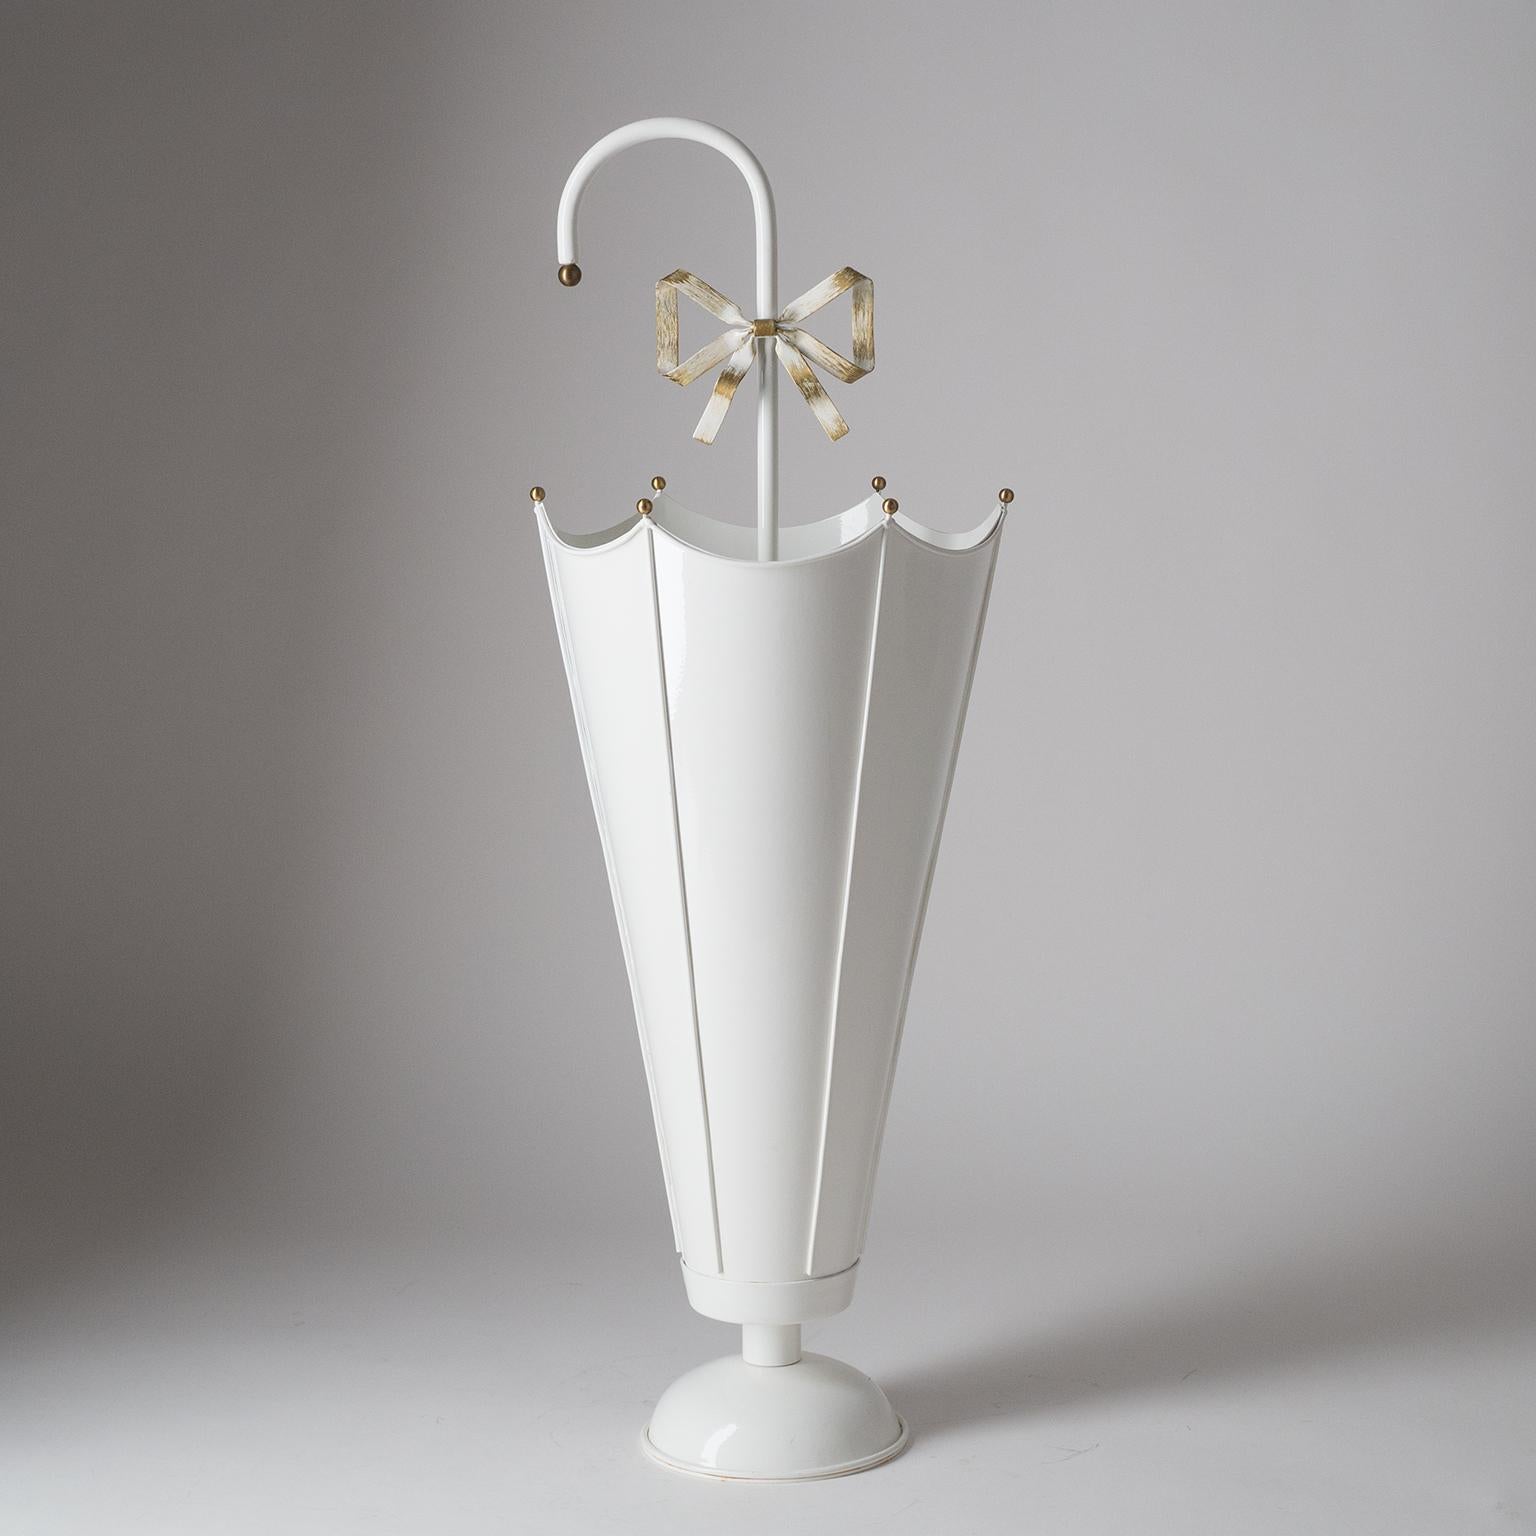 Lovely umbrella stand from the 1950s. White lacquered body with brass details in very good original condition.